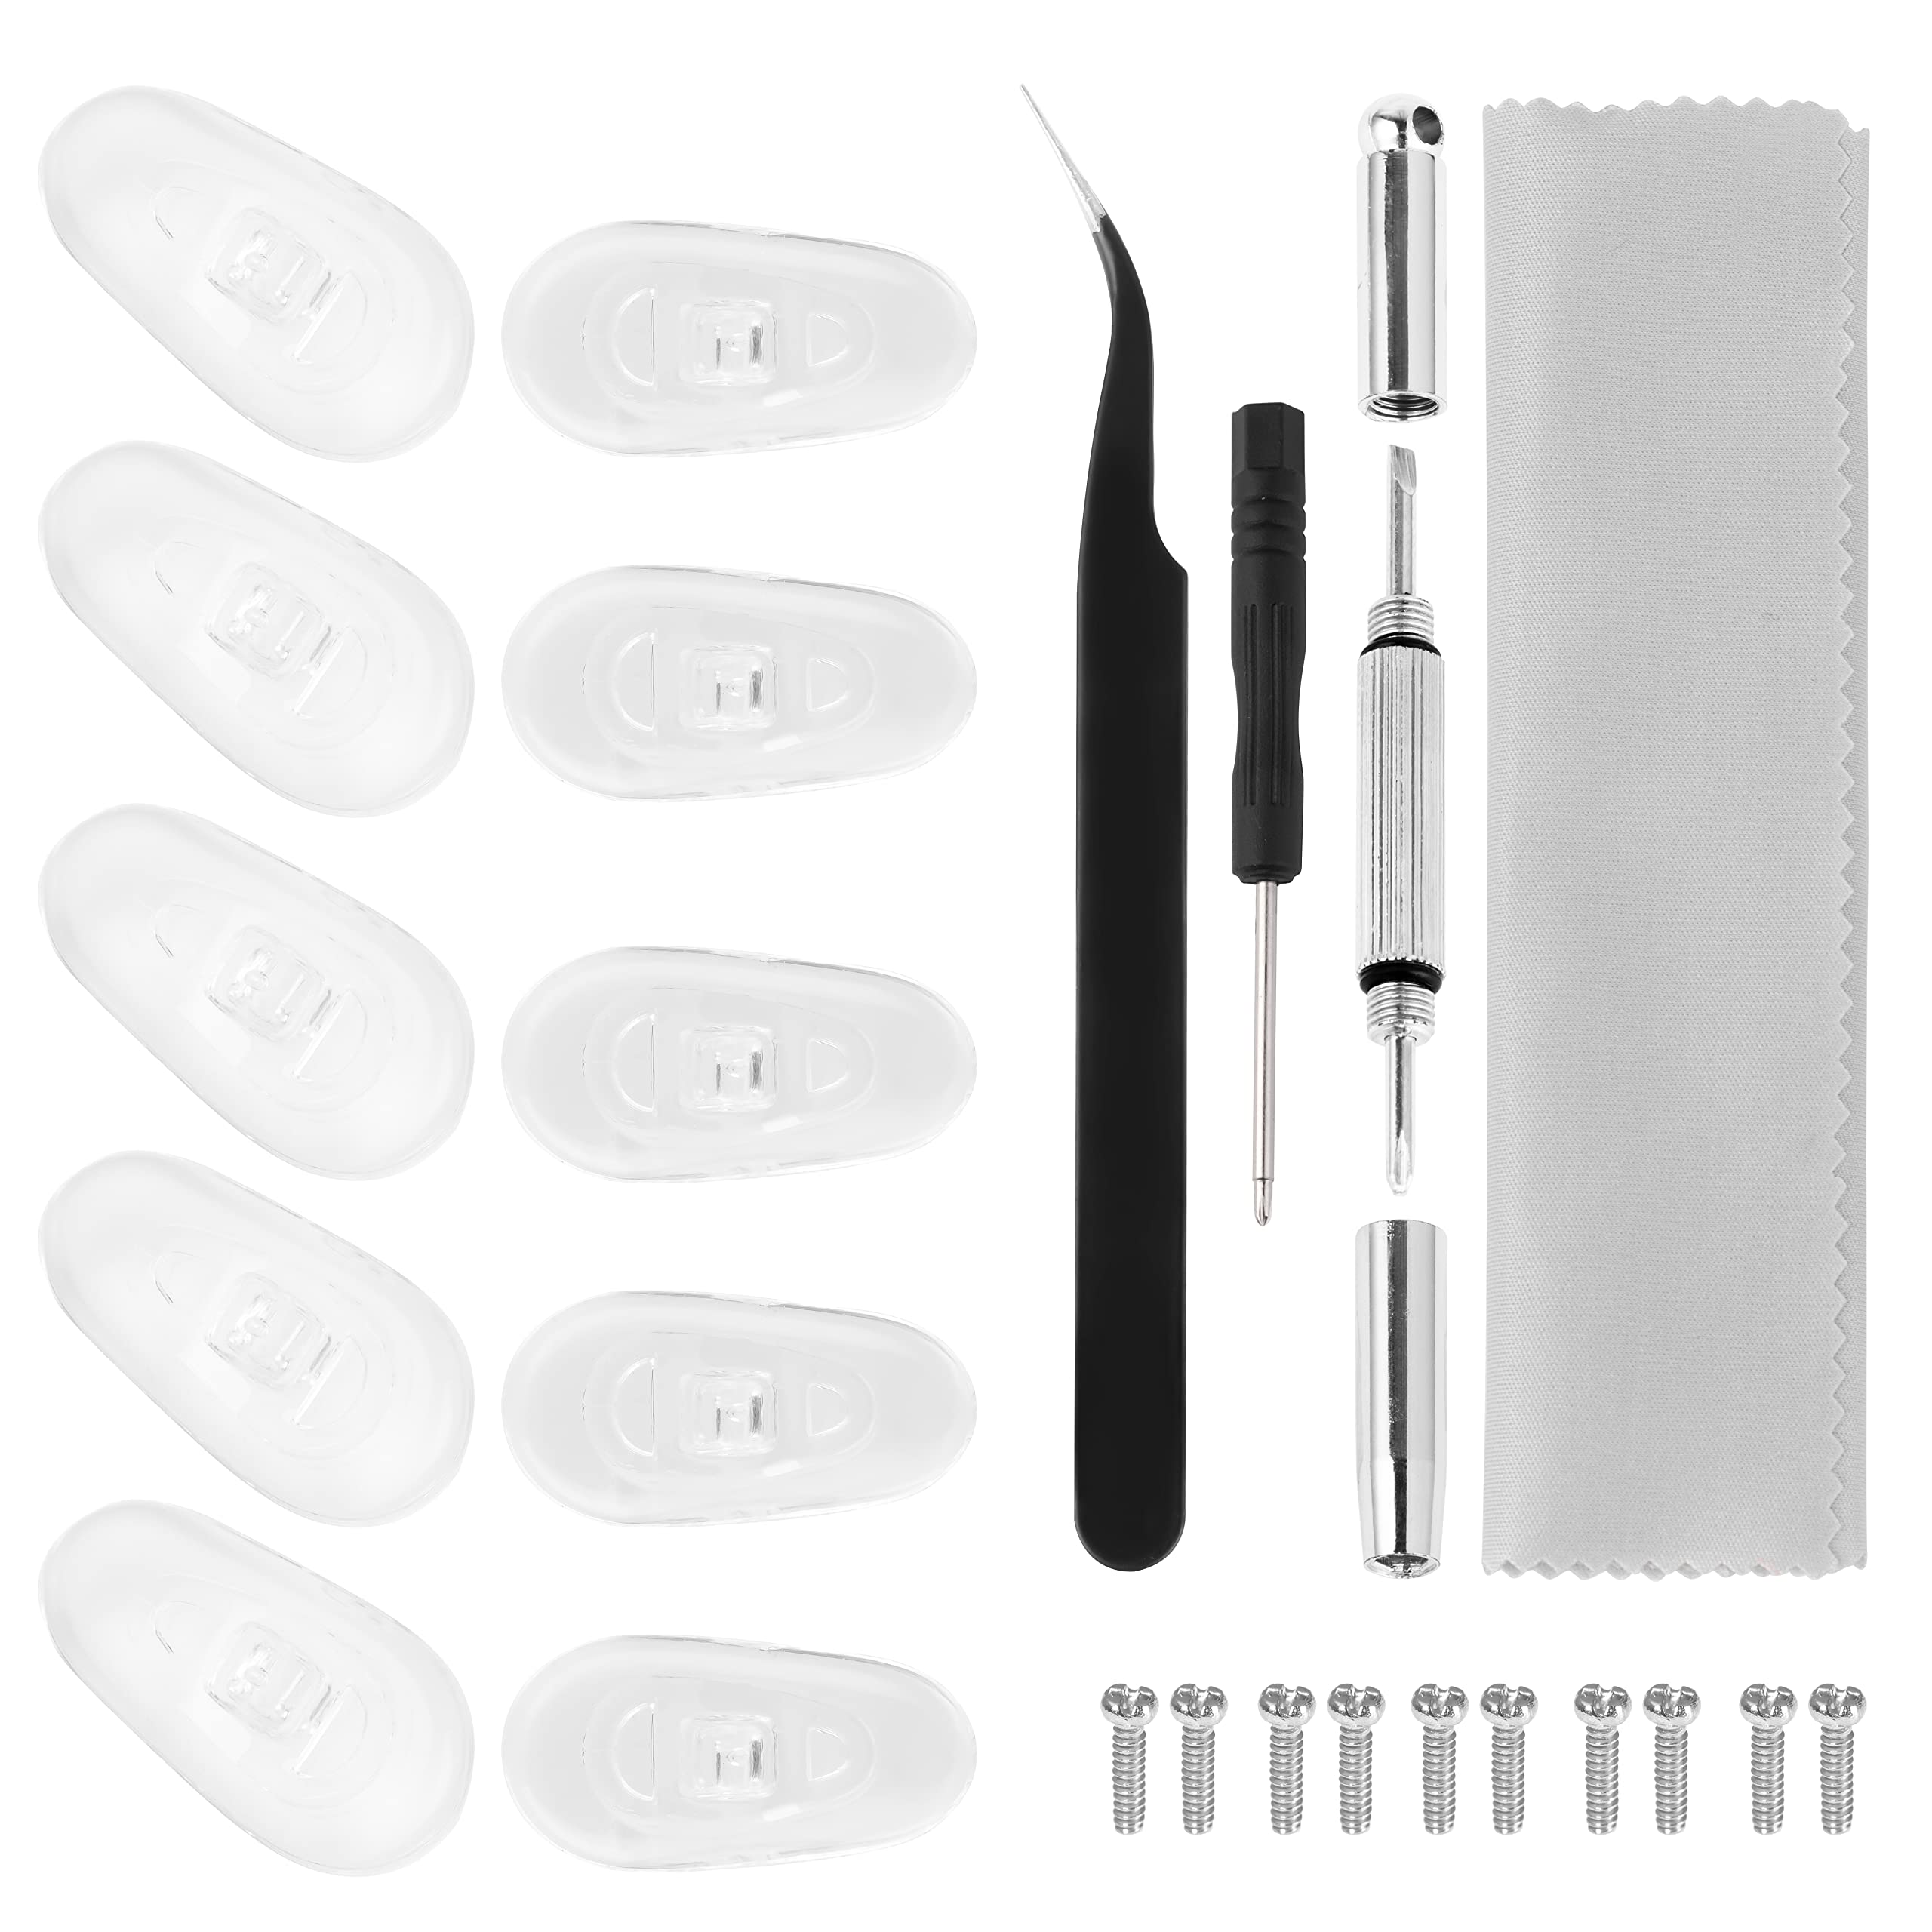 Glasses Nose Pad Replacement Kit, YSSAIL Eyeglass Repair Kit with 5 Pairs  of Nose Pads, Screws